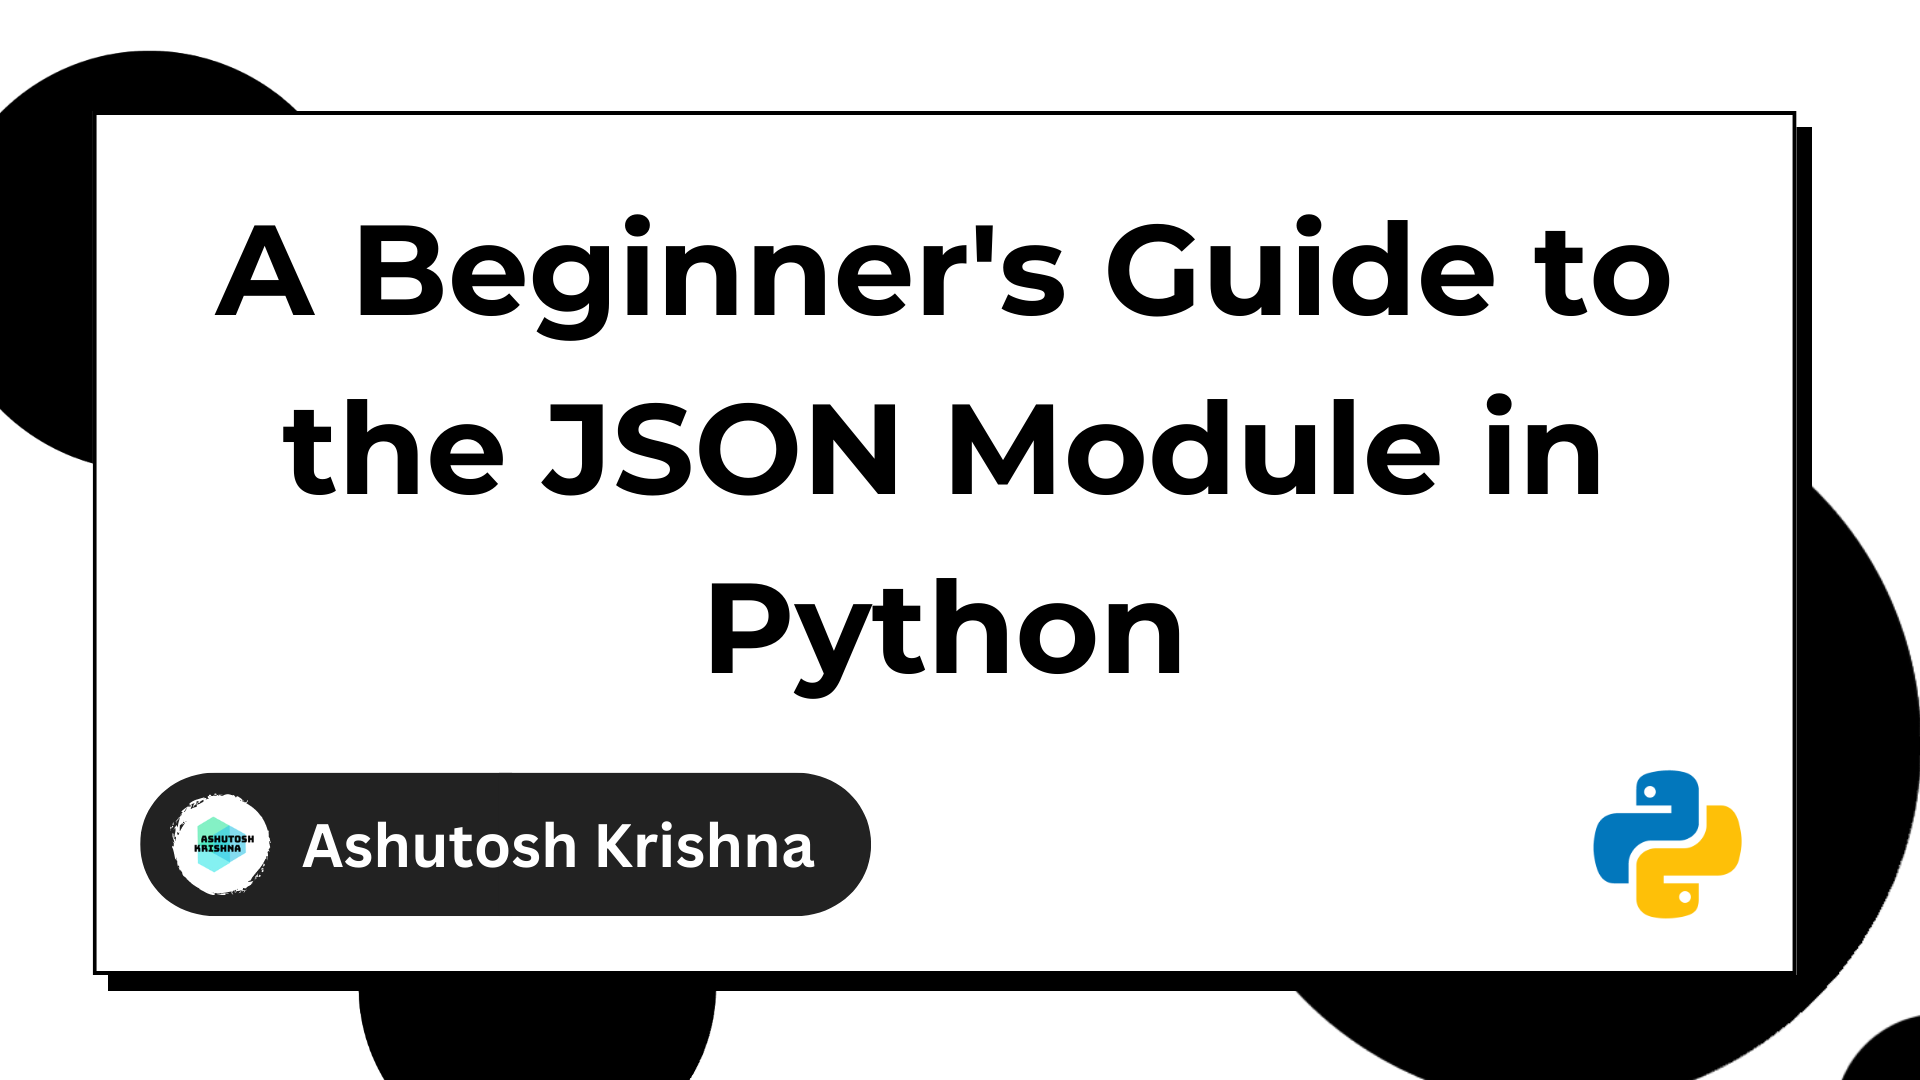 How to Use the JSON Module in Python – A Beginner's Guide